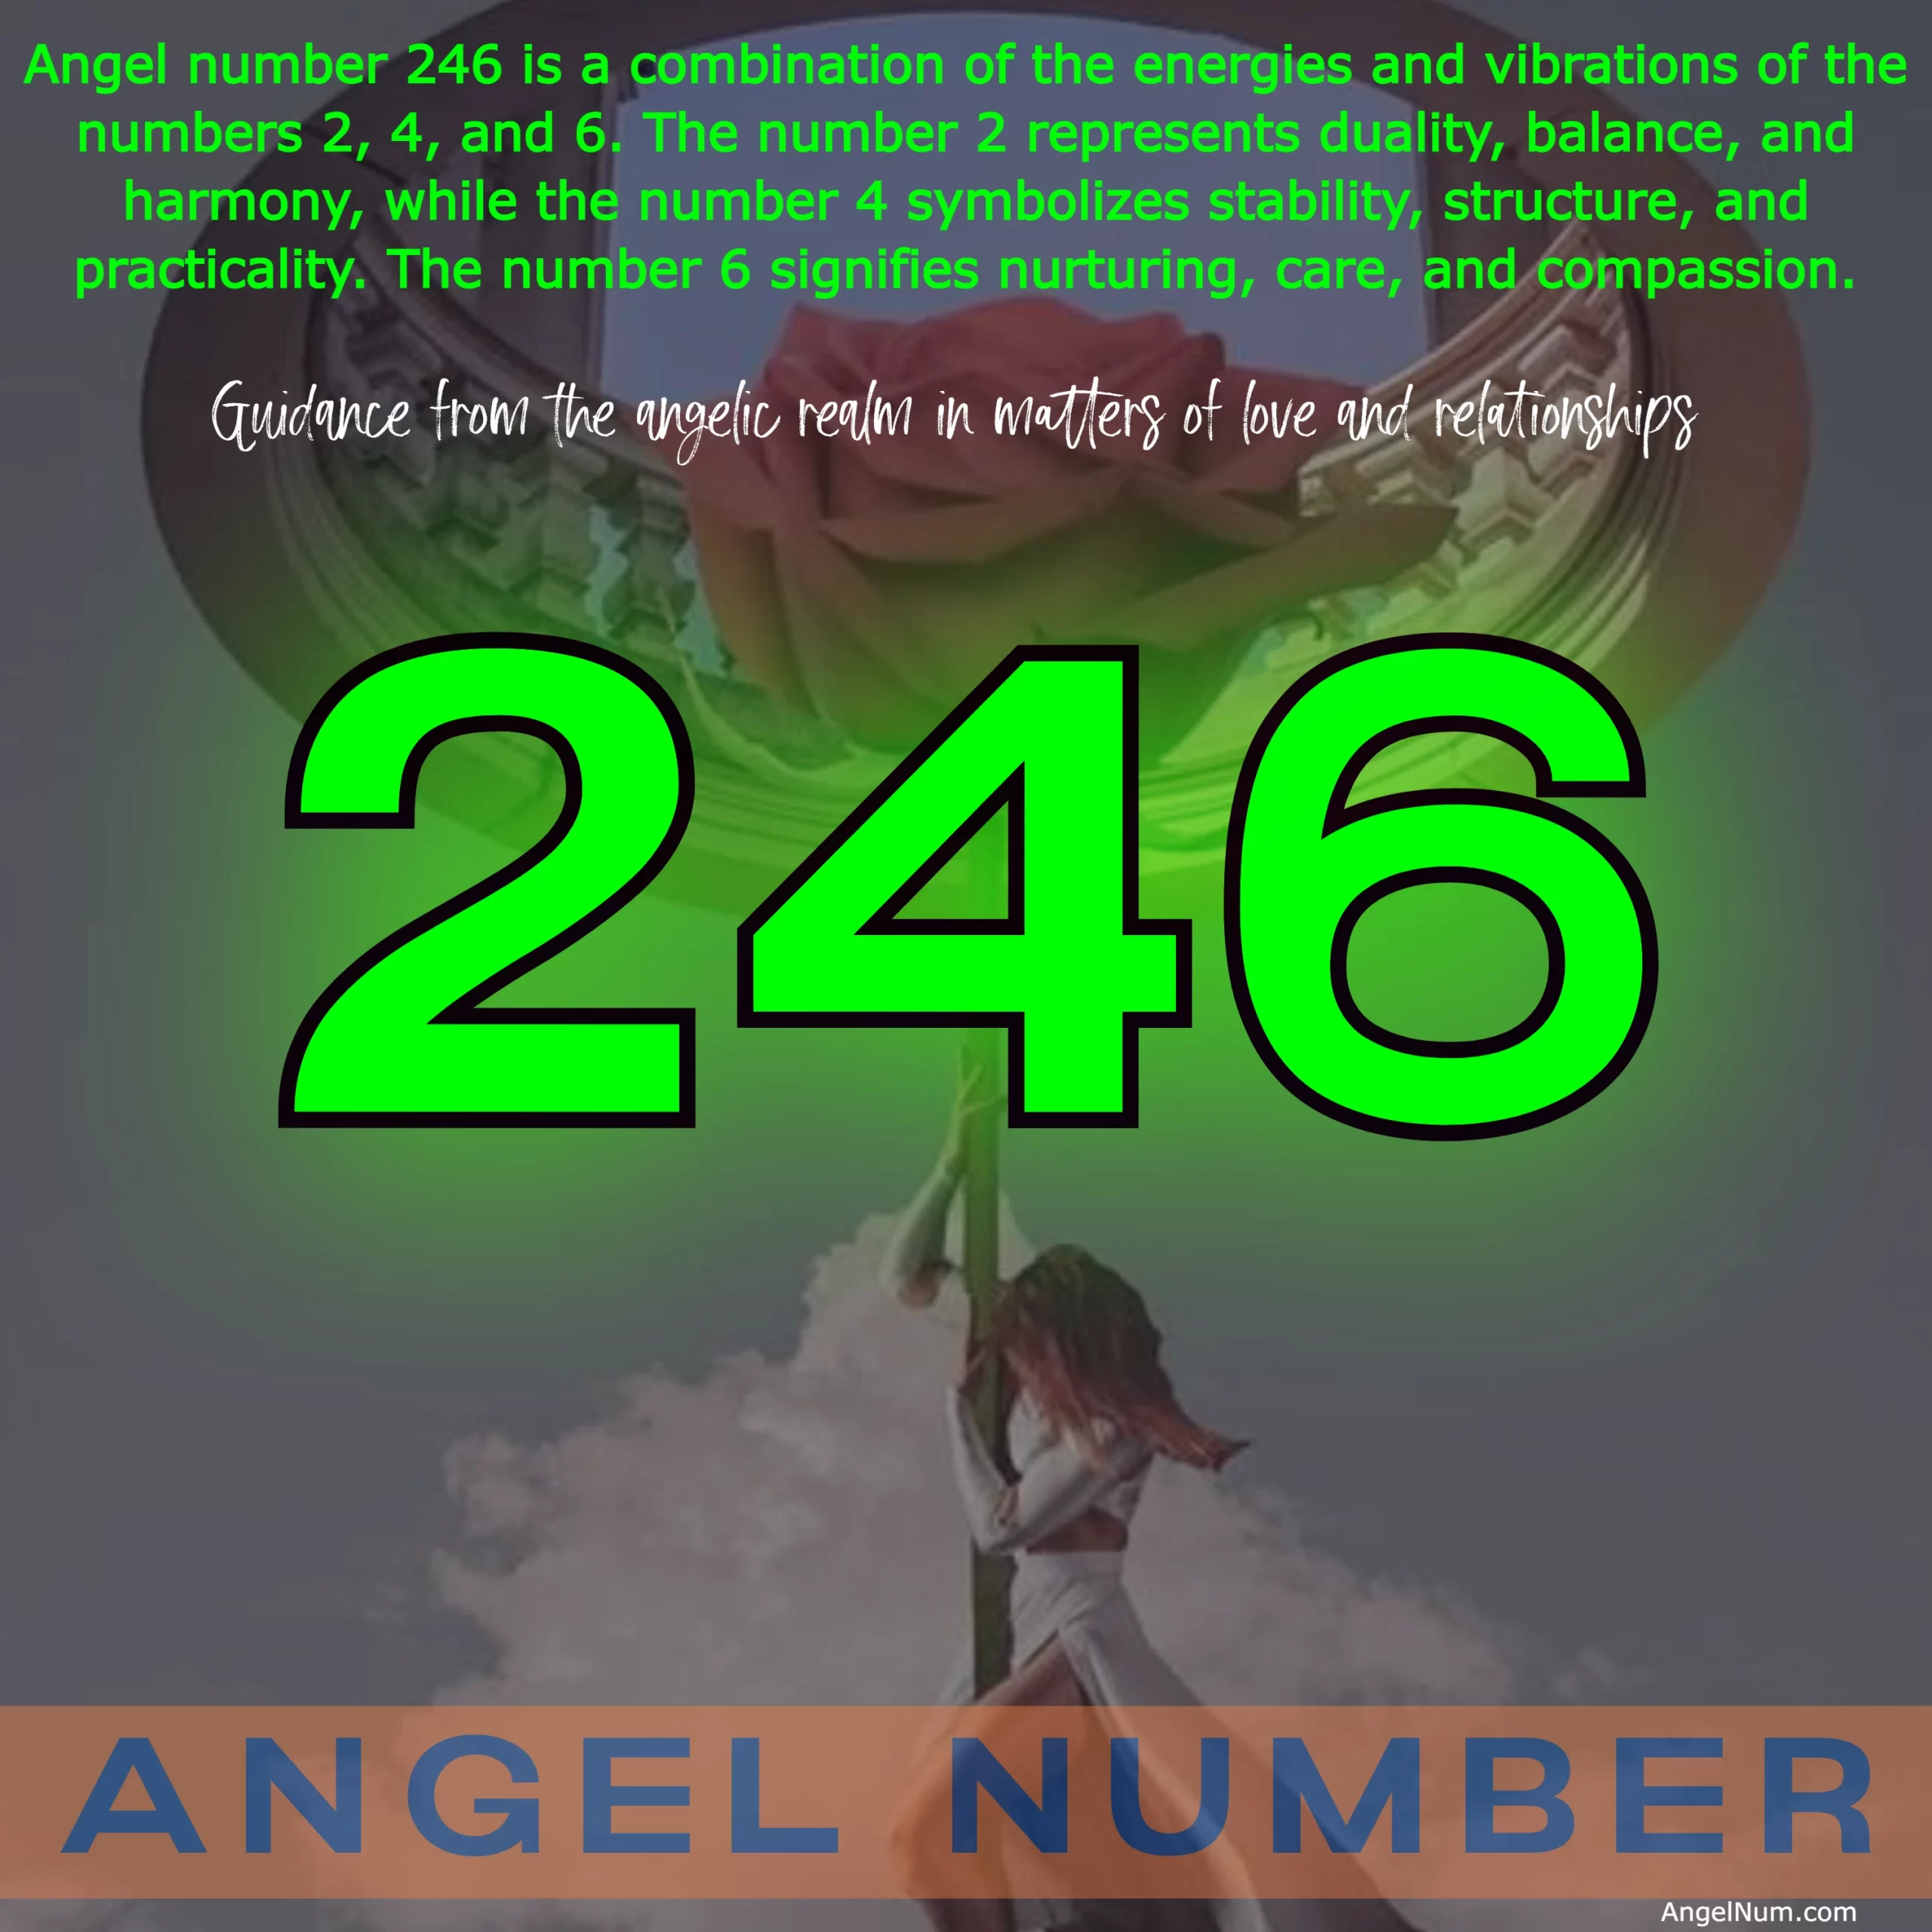 Unlocking the Meaning of Angel Number 246: Love, Balance, and Harmony